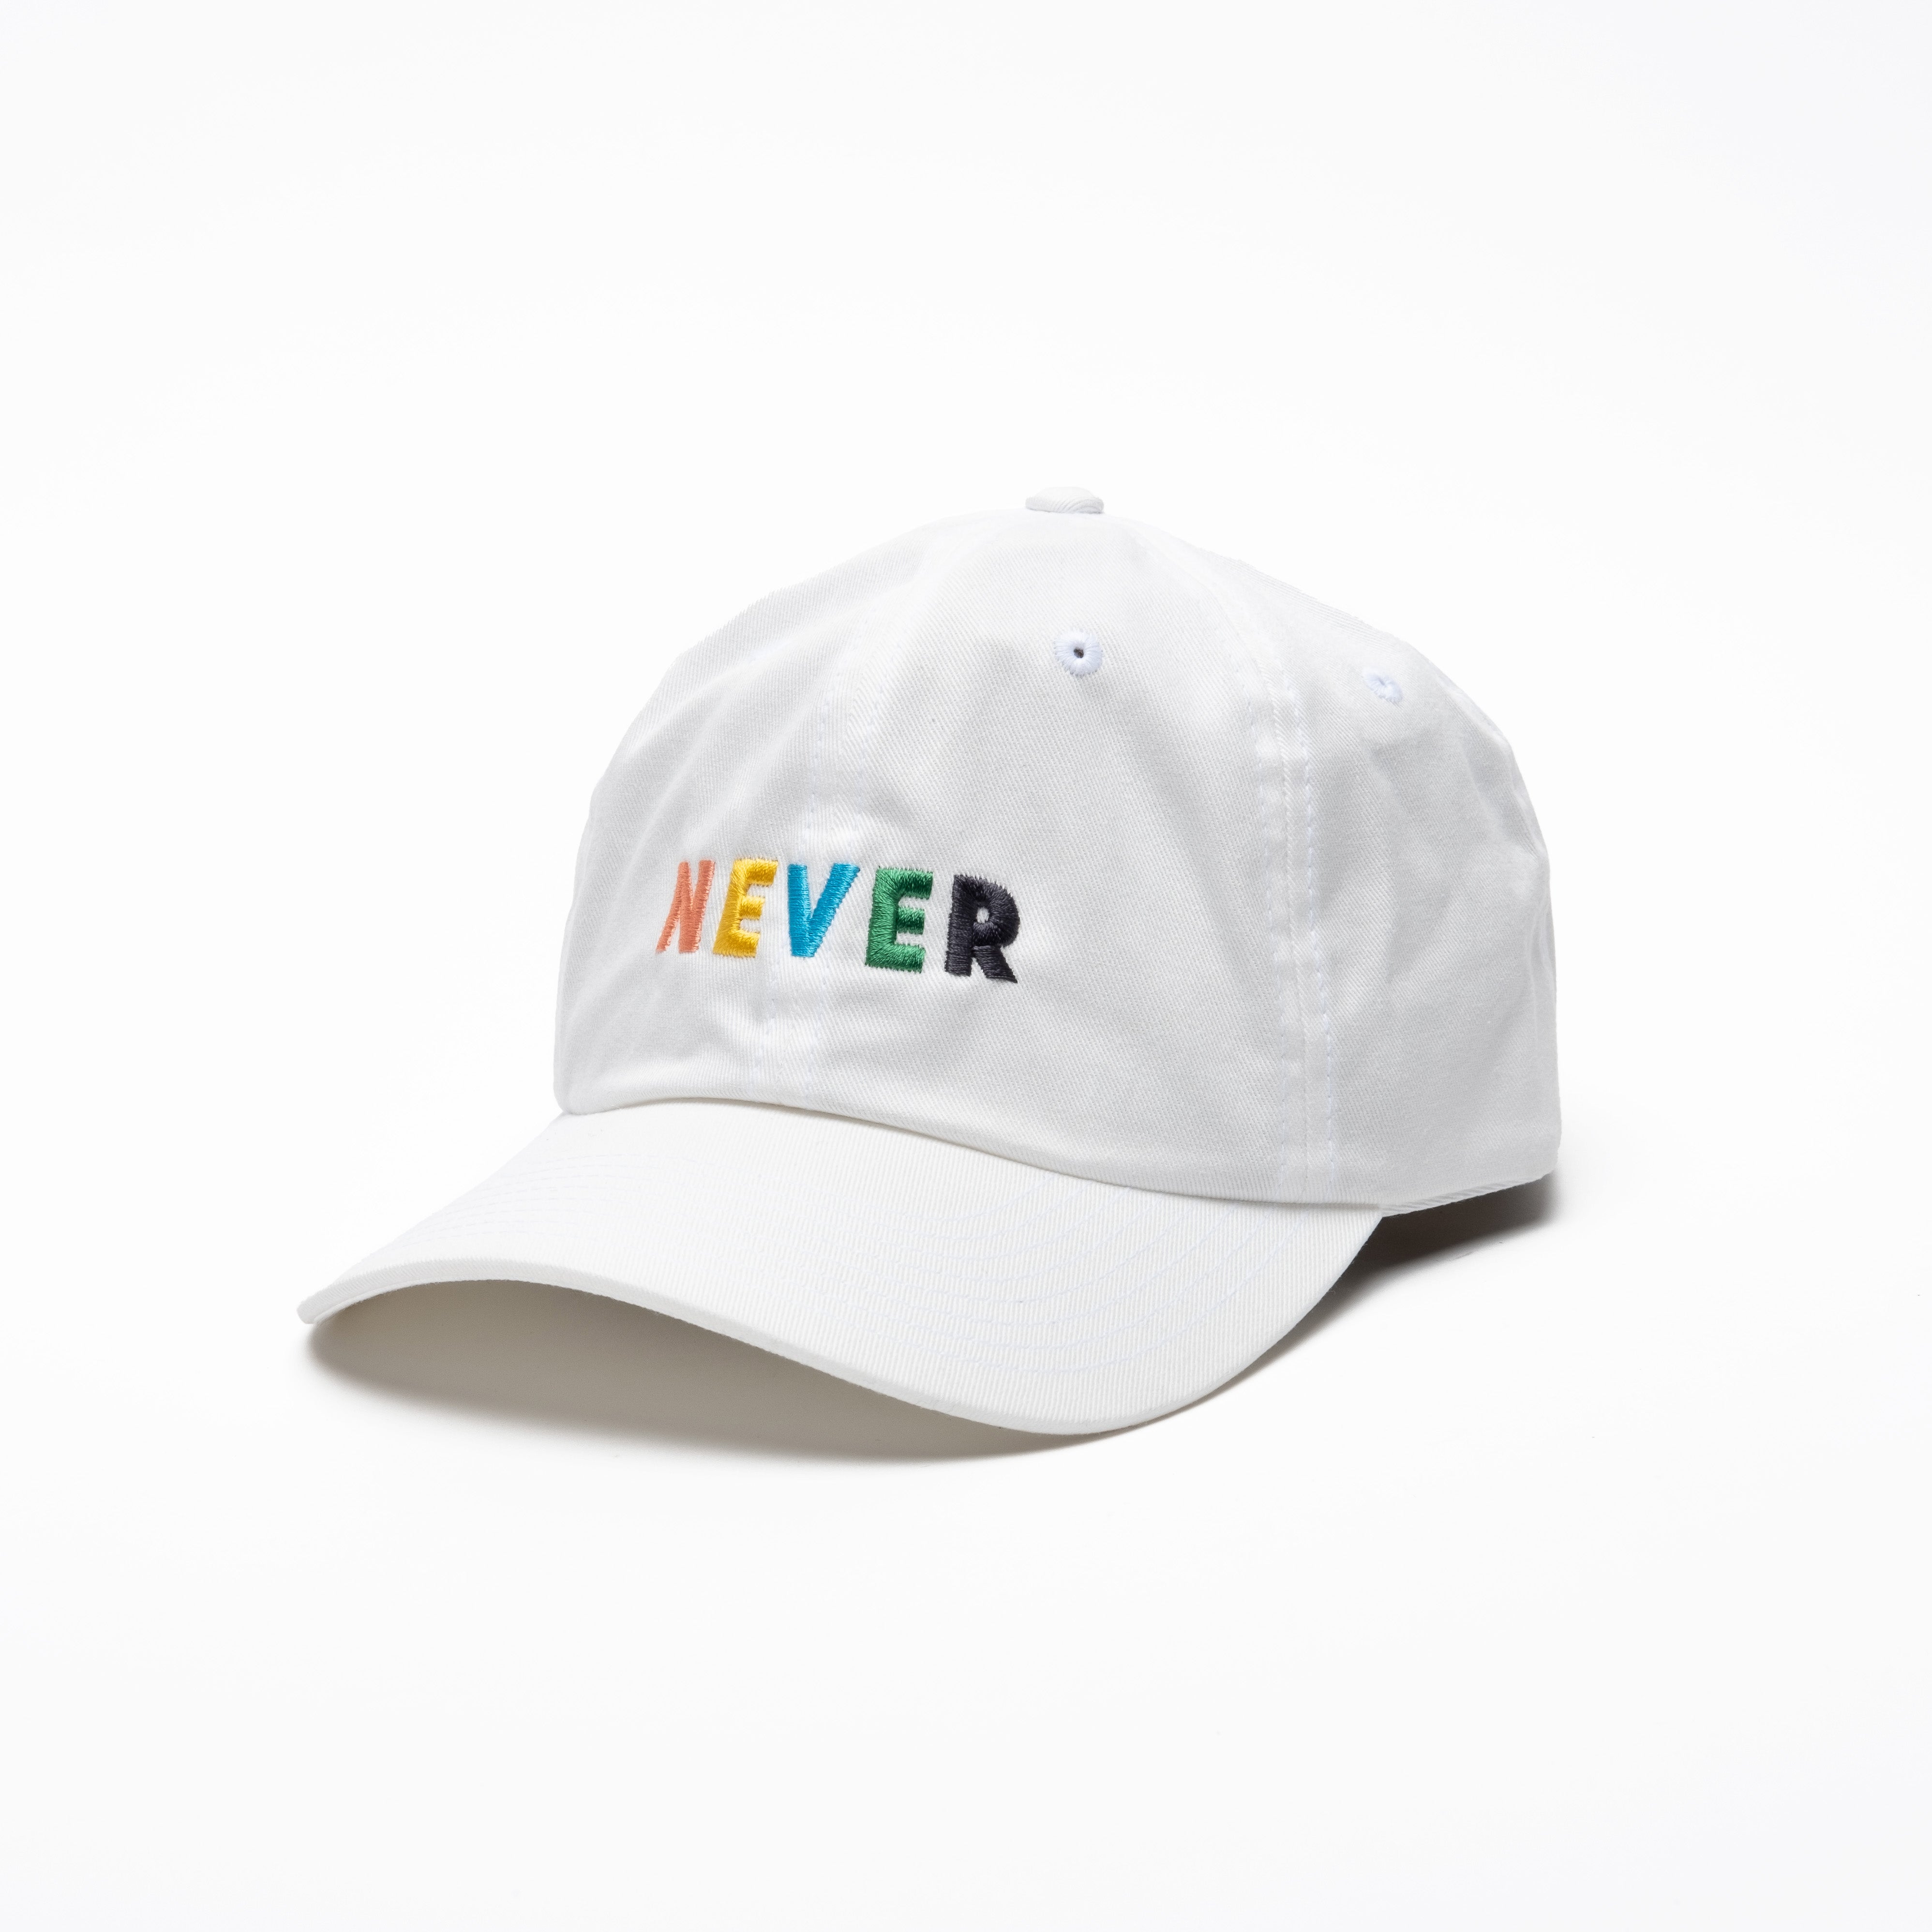 NEVER Dad Hat